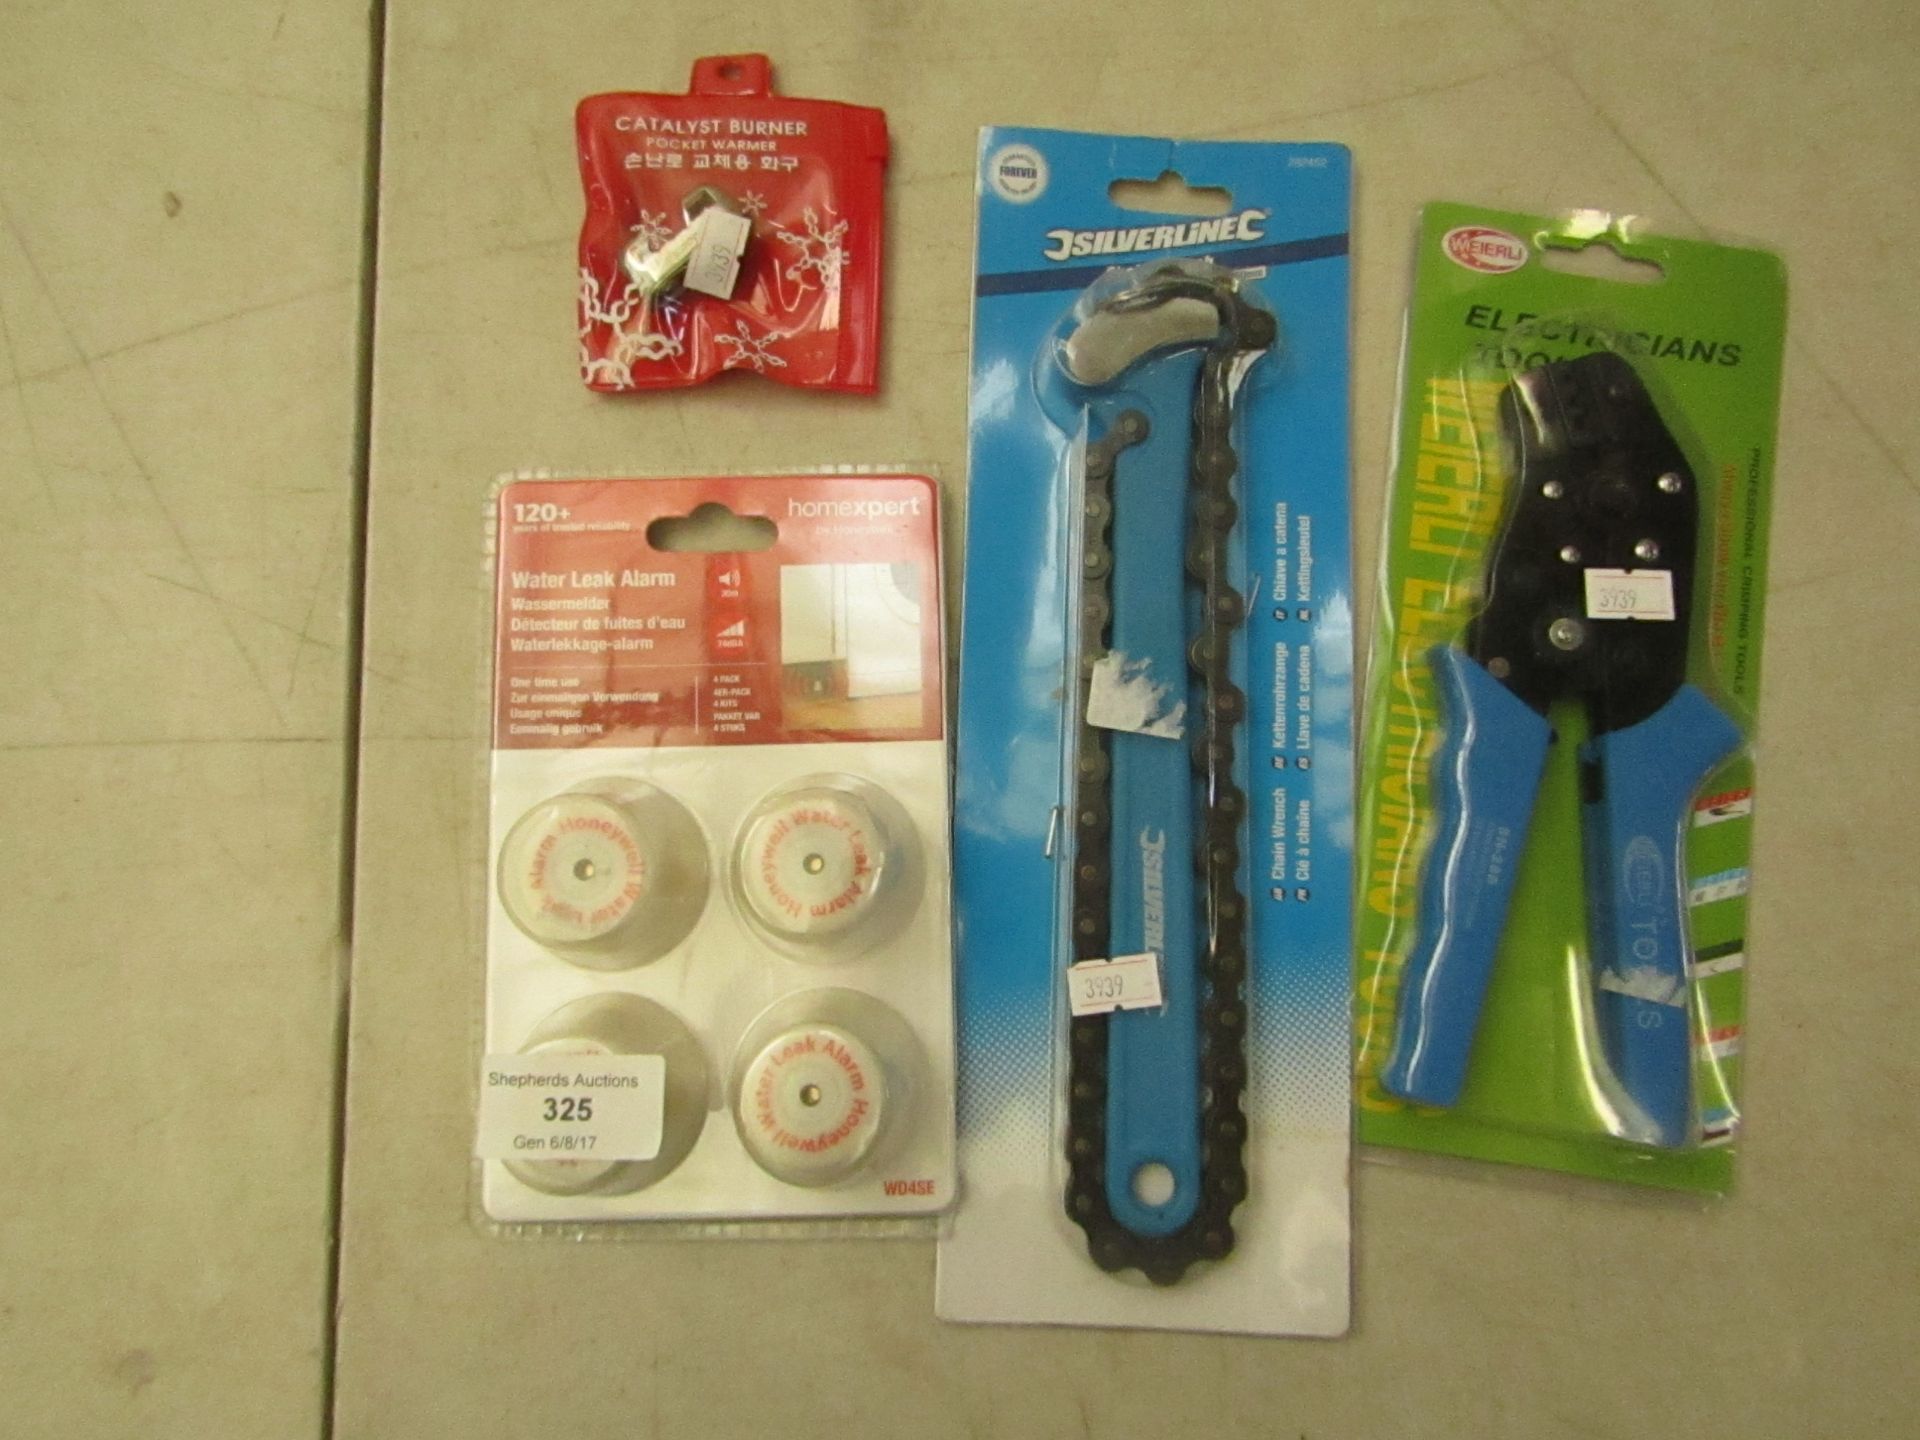 4x Items being; Catalyst burner, pocket warmer, new and packaged 4 Pack of Homexpert water leak